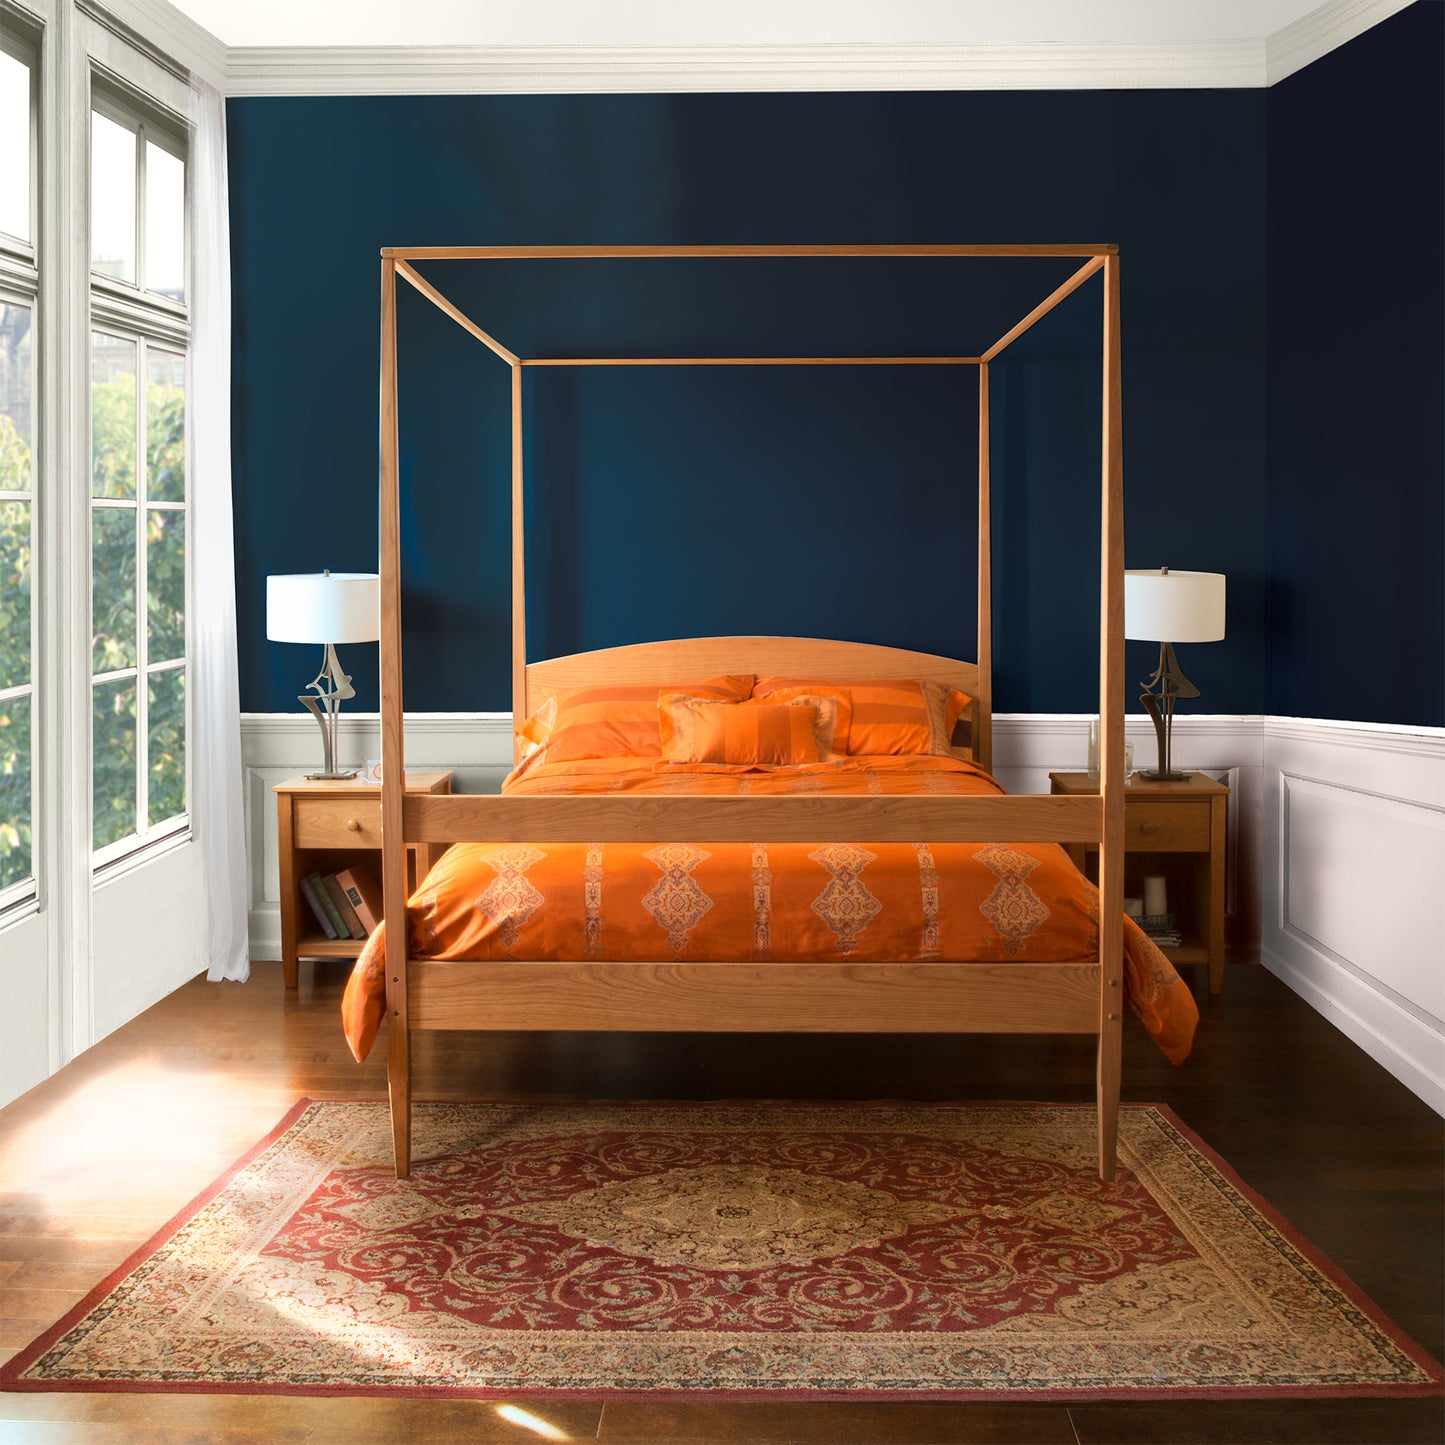 A modern bedroom featuring a Maple Corner Woodworks Vermont Shaker Four Poster Bed with Canopy with orange bedding, flanked by white nightstands and lamps, set against a dark blue wall, above a colorful oriental rug.